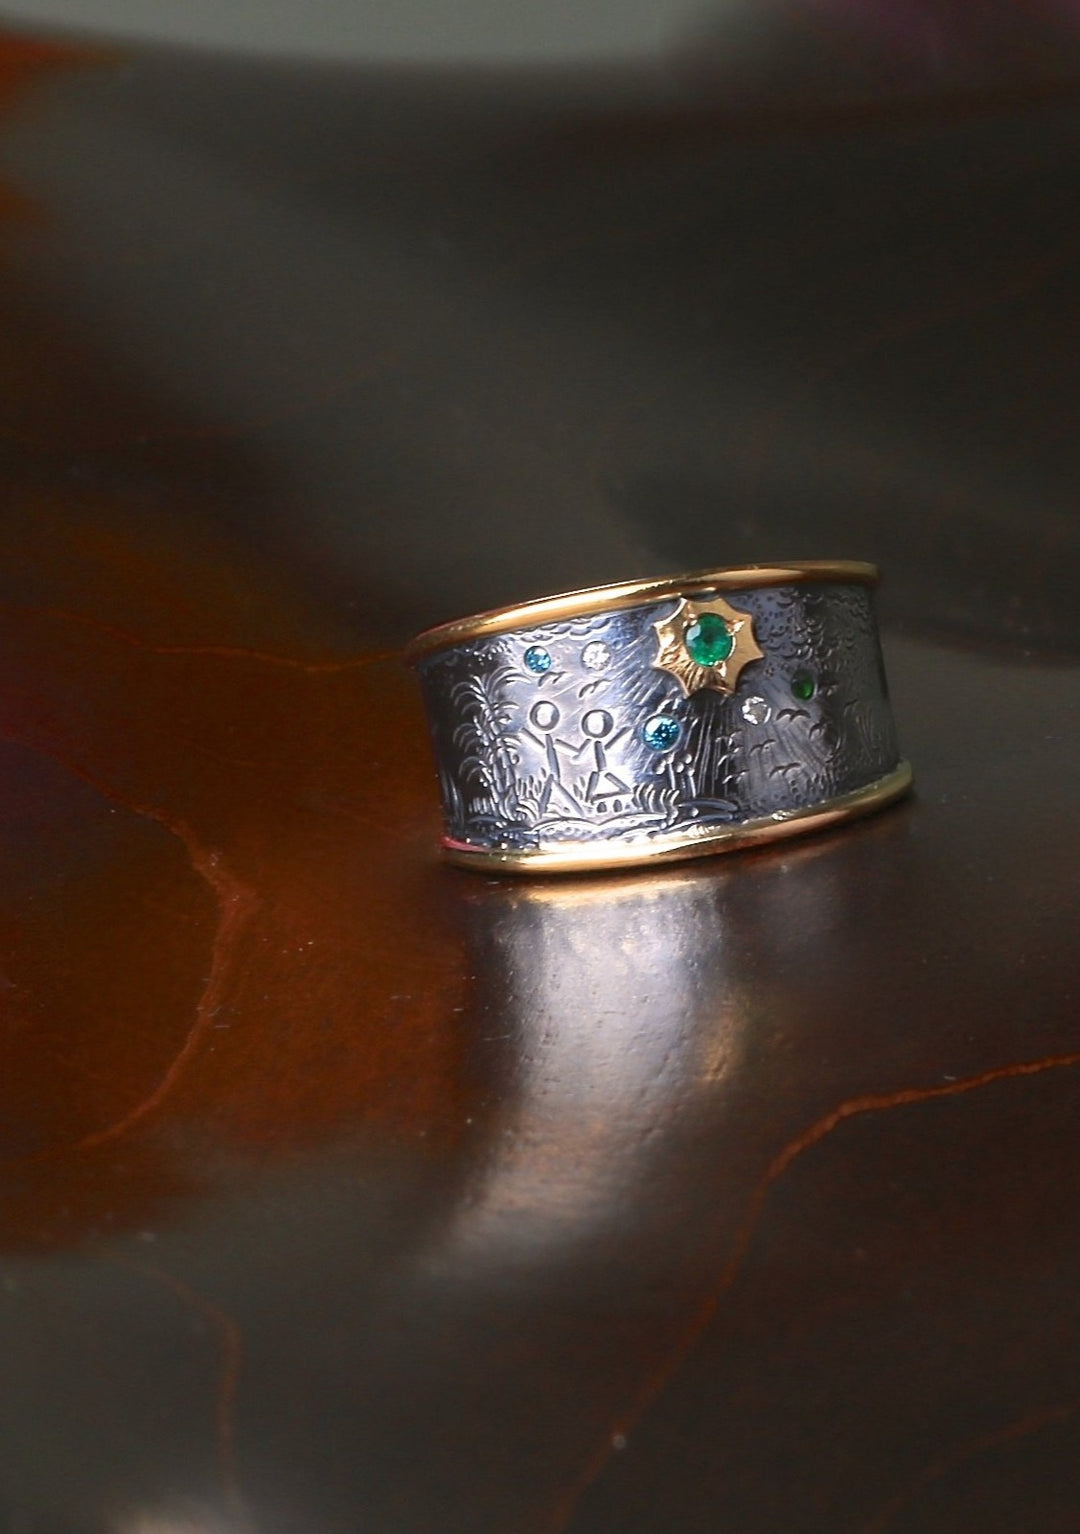 Emerald Story Ring 06940 - Ormachea Jewelry